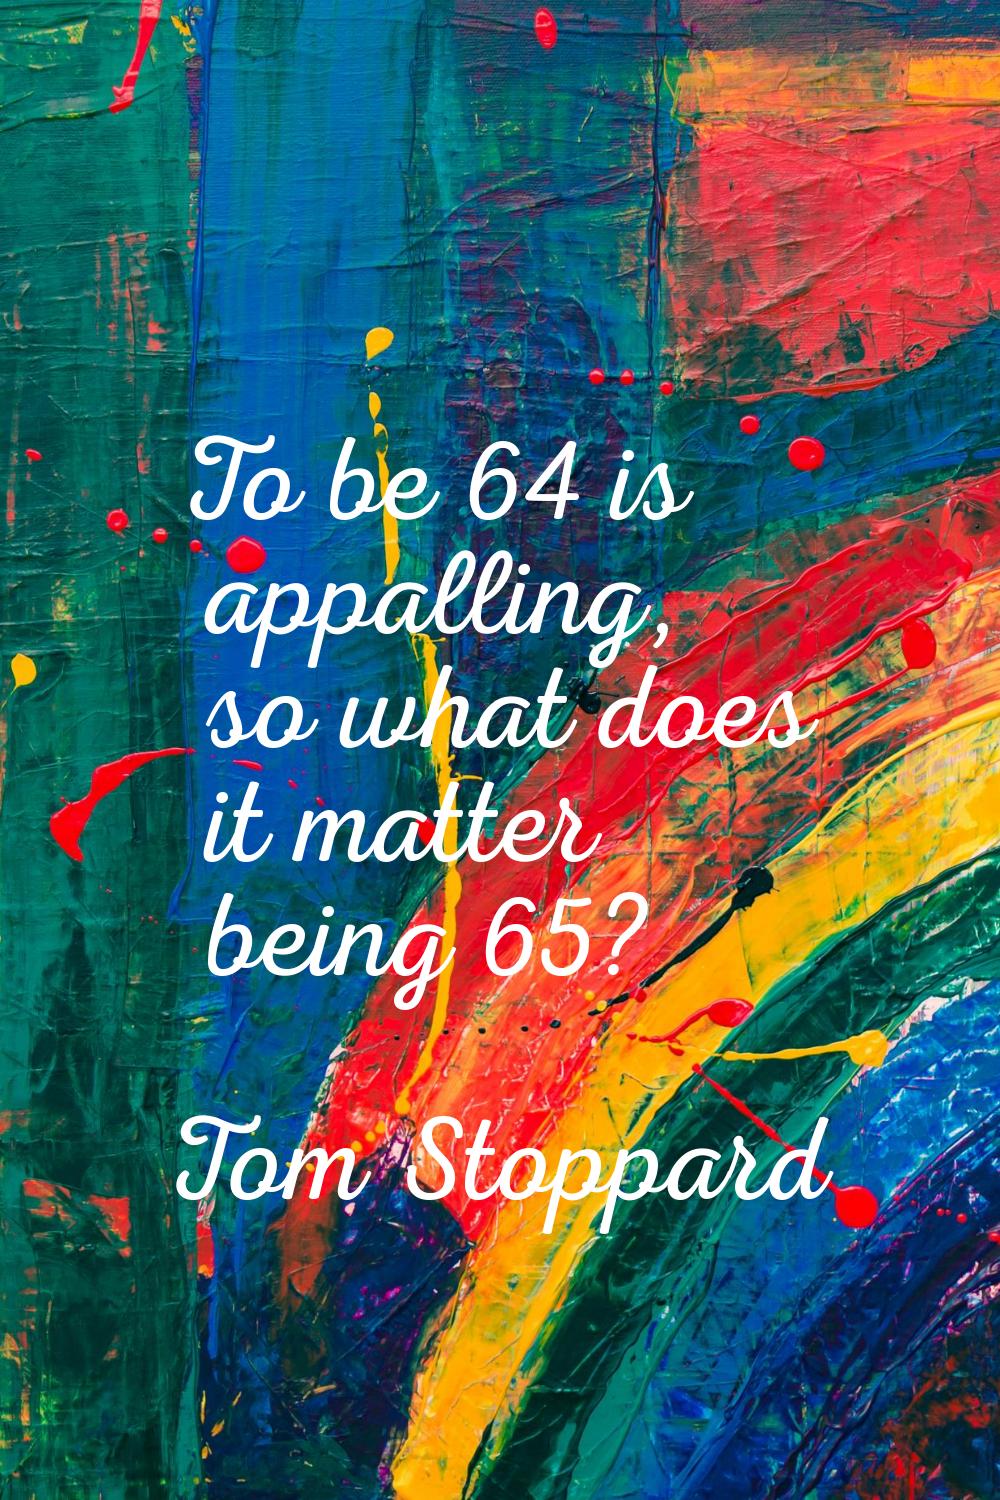 To be 64 is appalling, so what does it matter being 65?